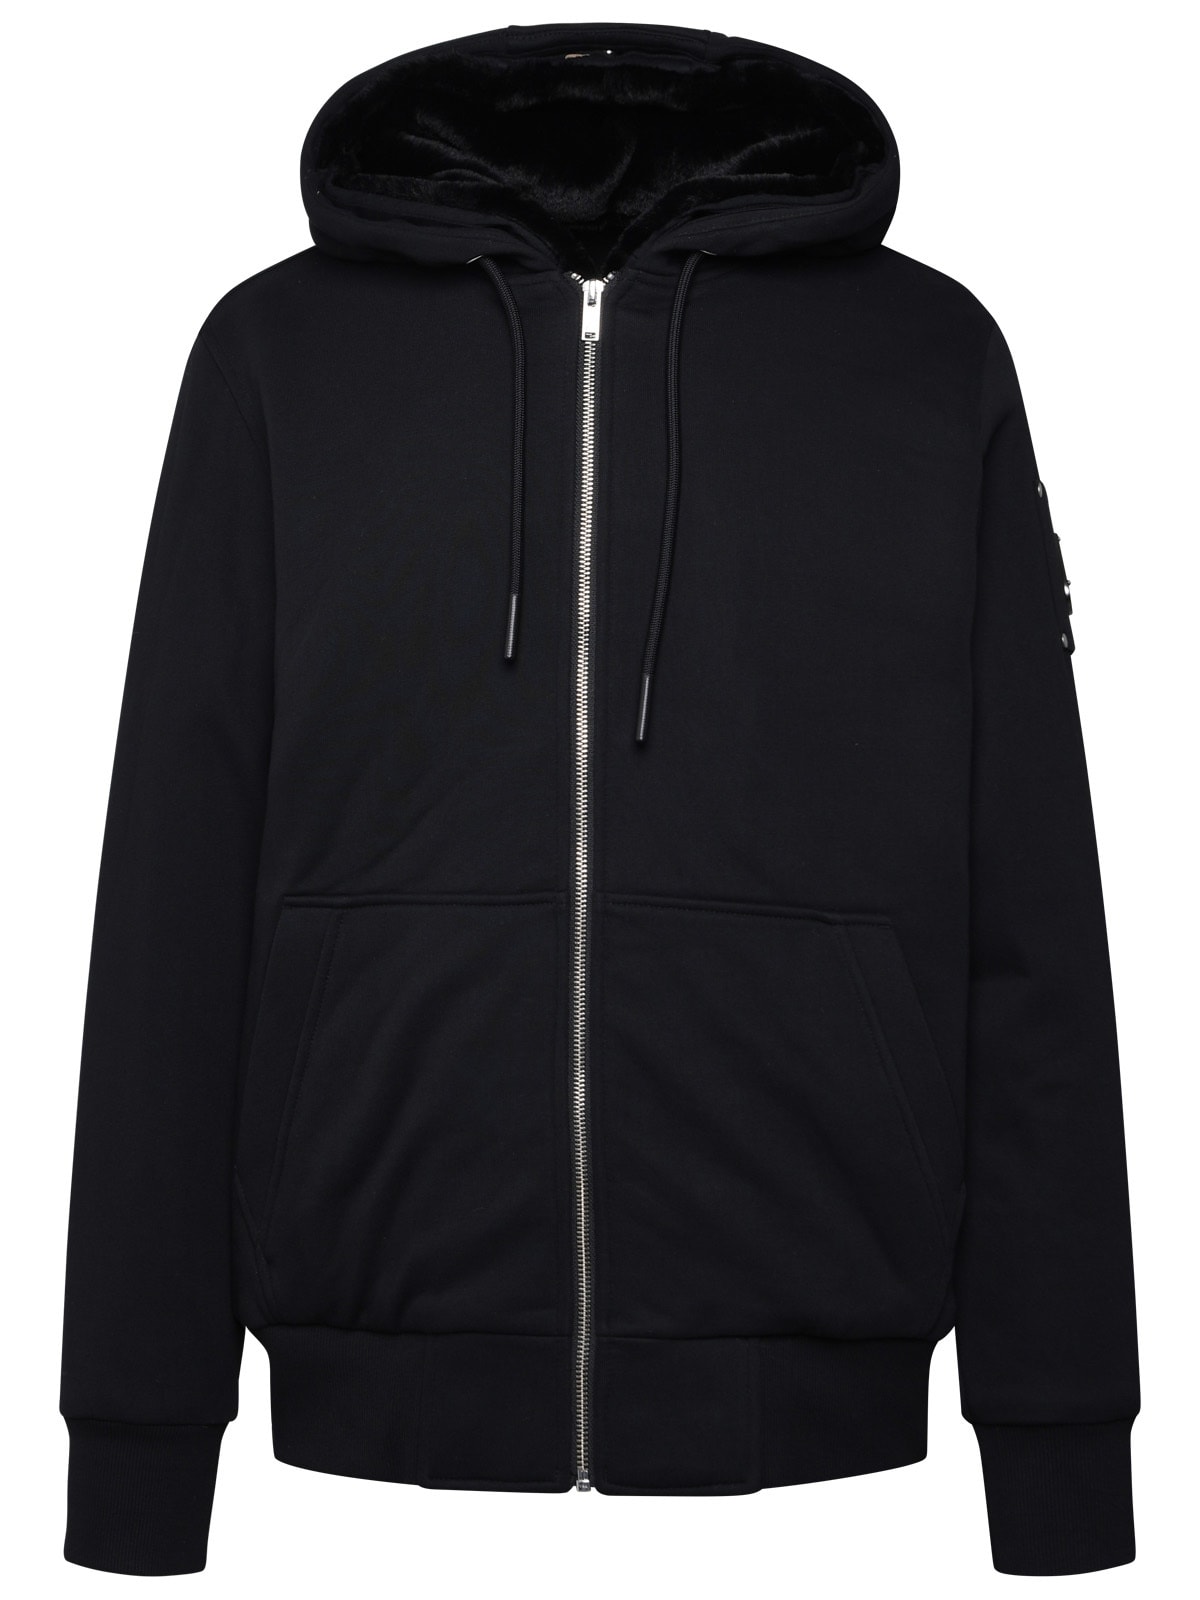 MOOSE KNUCKLES CLASSIC BUNNY 3 JACKET IN BLACK COTTON BLEND